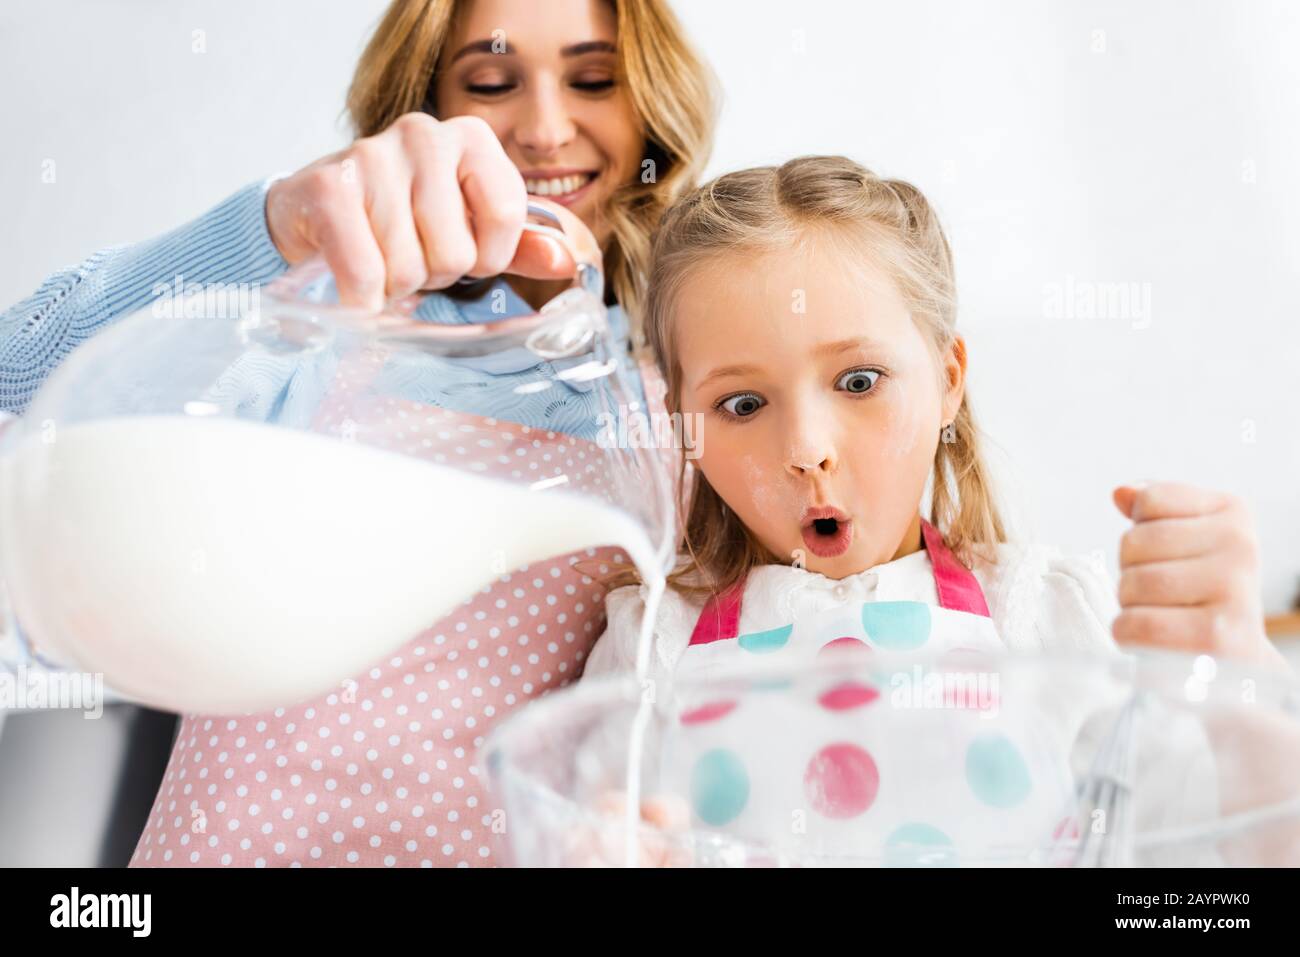 Low angle view of shocked daughter looking at mother pouring milk from jug in bowl Stock Photo